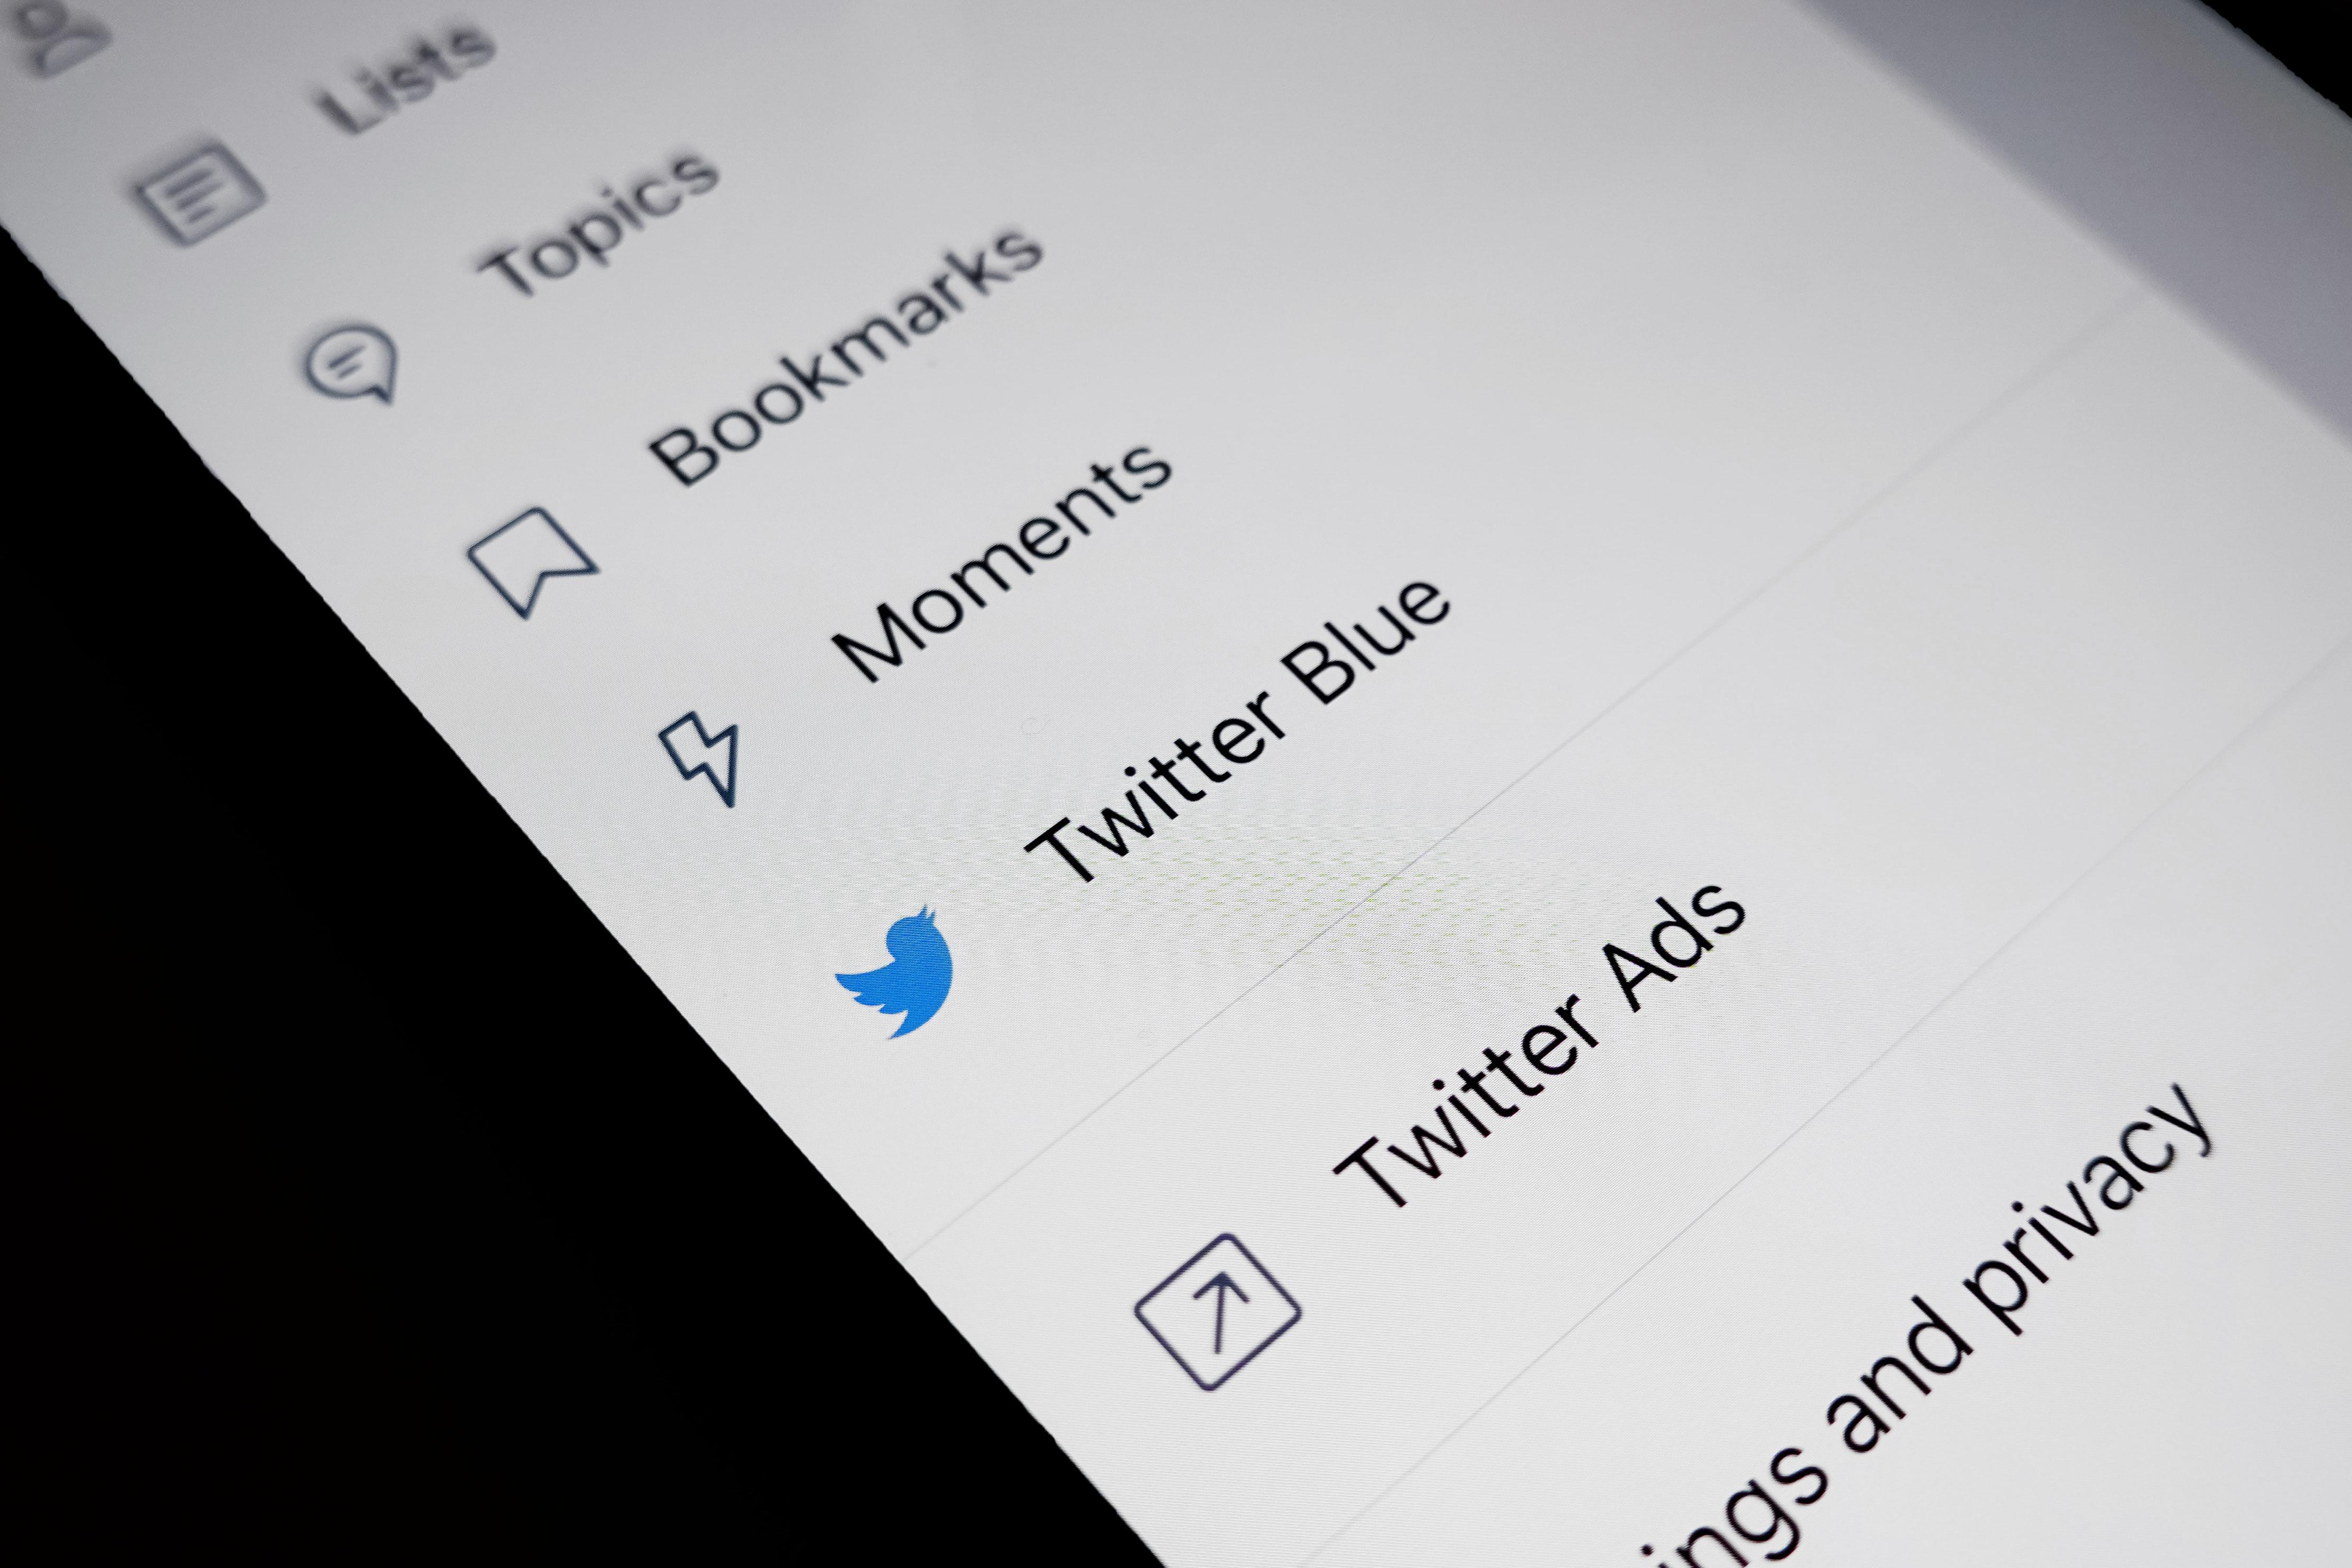 Twitter Blue displayed on a smartphone